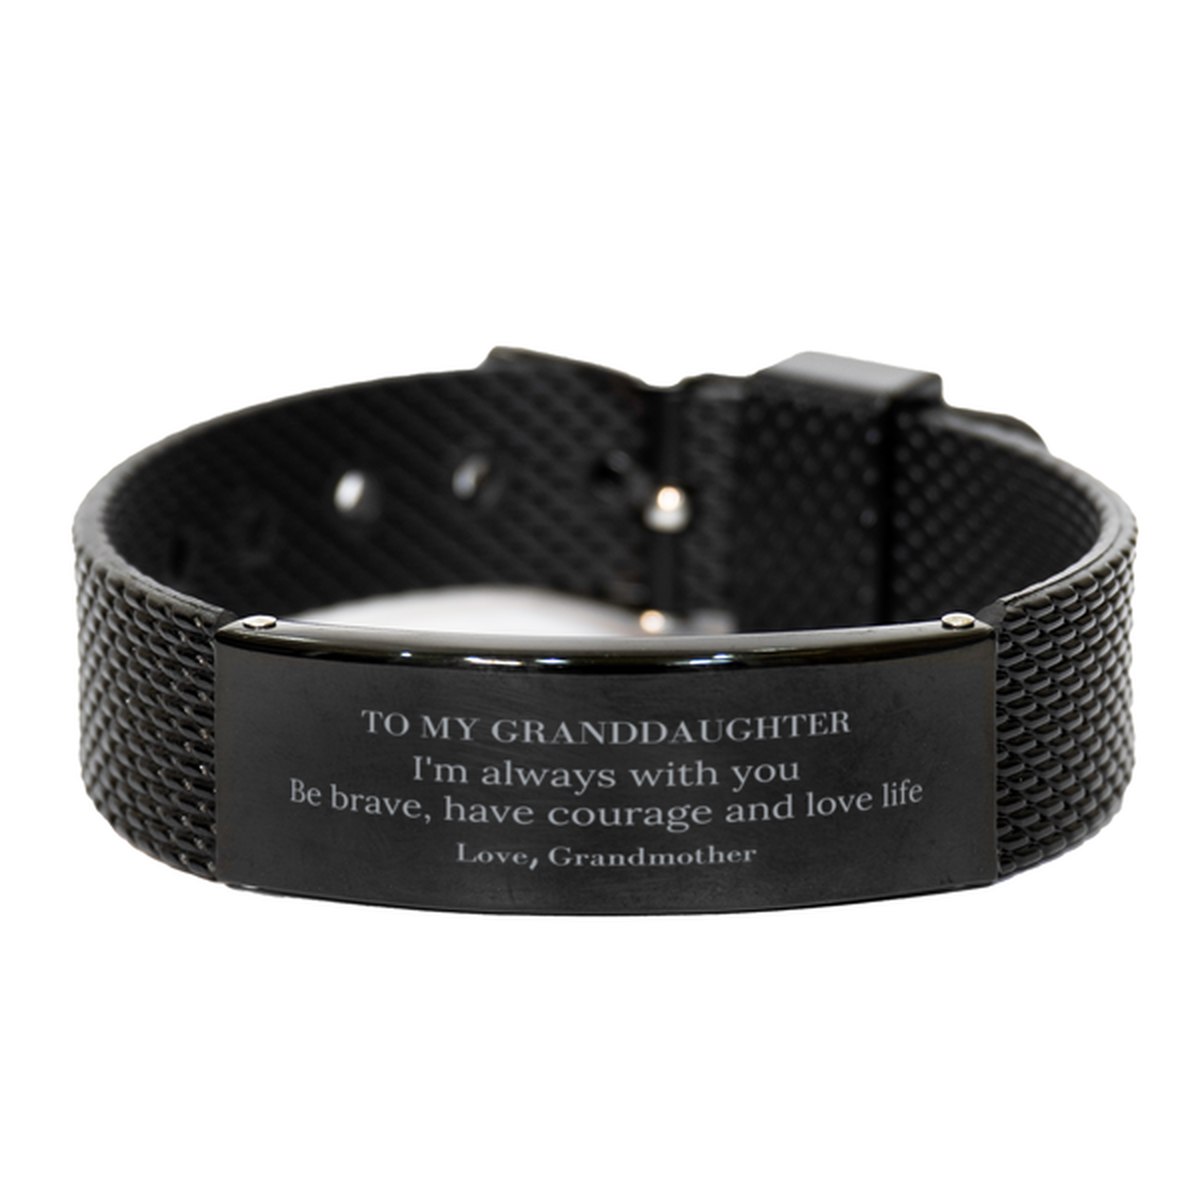 To My Granddaughter Gifts from Grandmother, Unique Black Shark Mesh Bracelet Inspirational Christmas Birthday Graduation Gifts for Granddaughter I'm always with you. Be brave, have courage and love life. Love, Grandmother